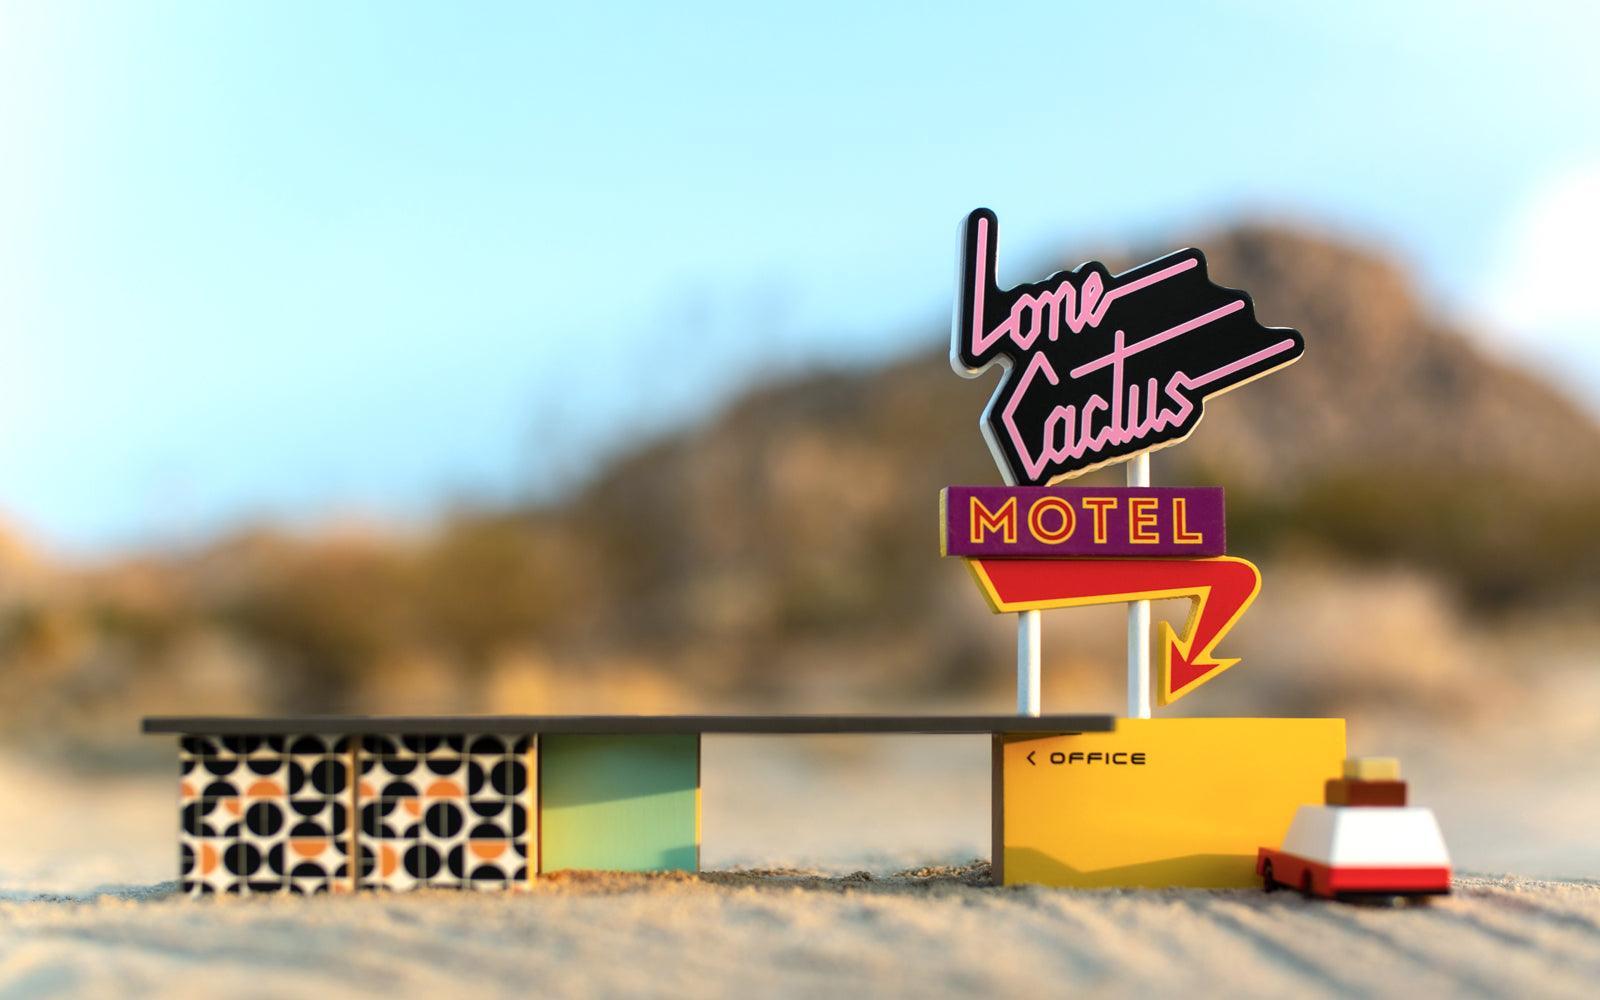 Candylab Lone Cactus Motel - Why and Whale